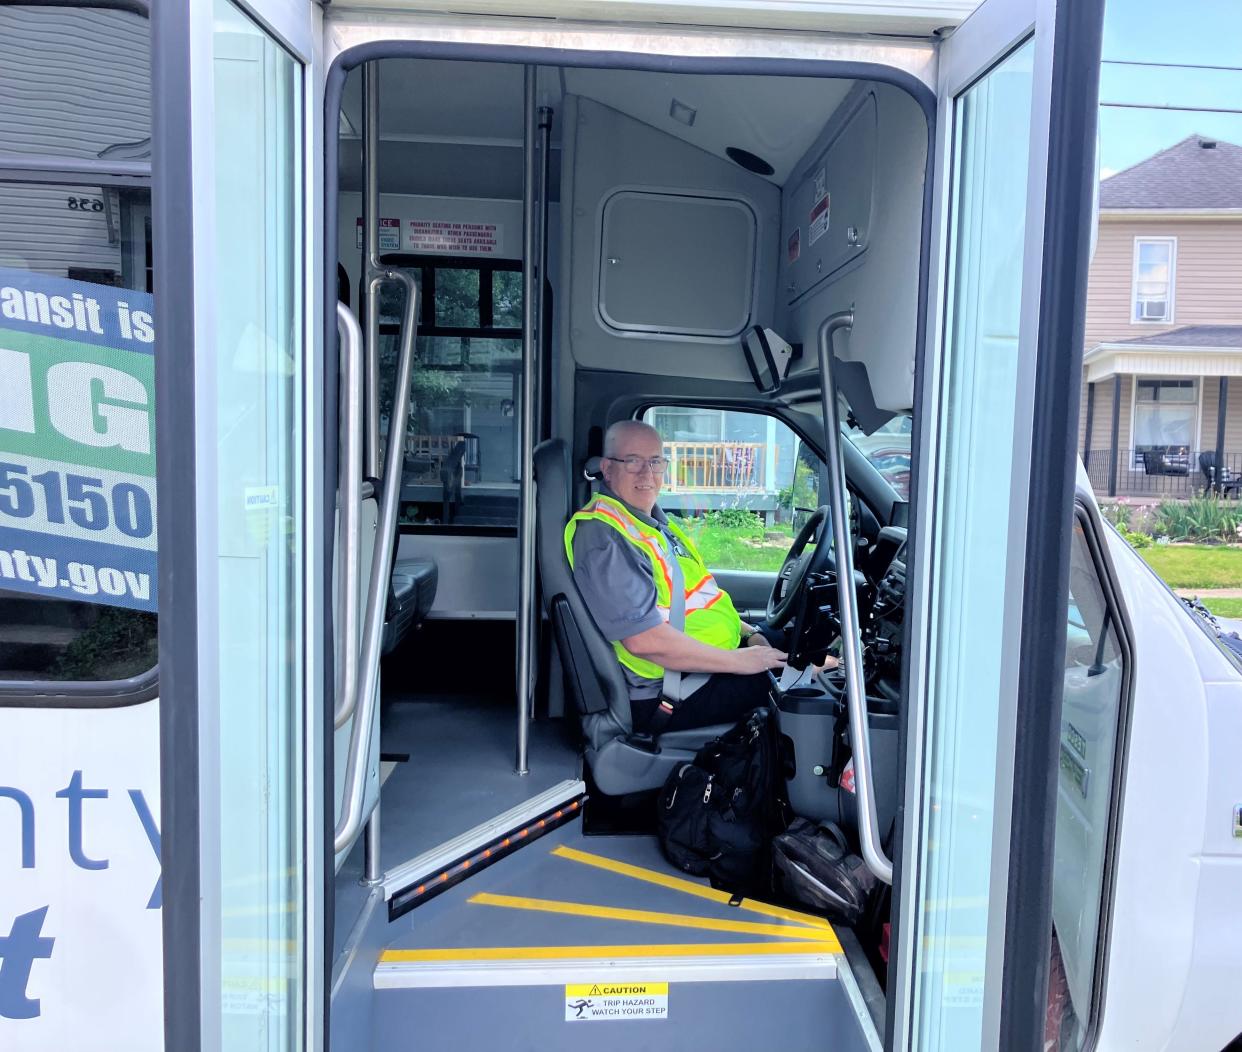 Licking County Transit driver Dennis Combs stops at the Day Avenue stop along the Main Street route on Monday, the first day of a deviated fixed-route service from Heritage Hail on East Main Street to Tamarack Road on West Main Street.